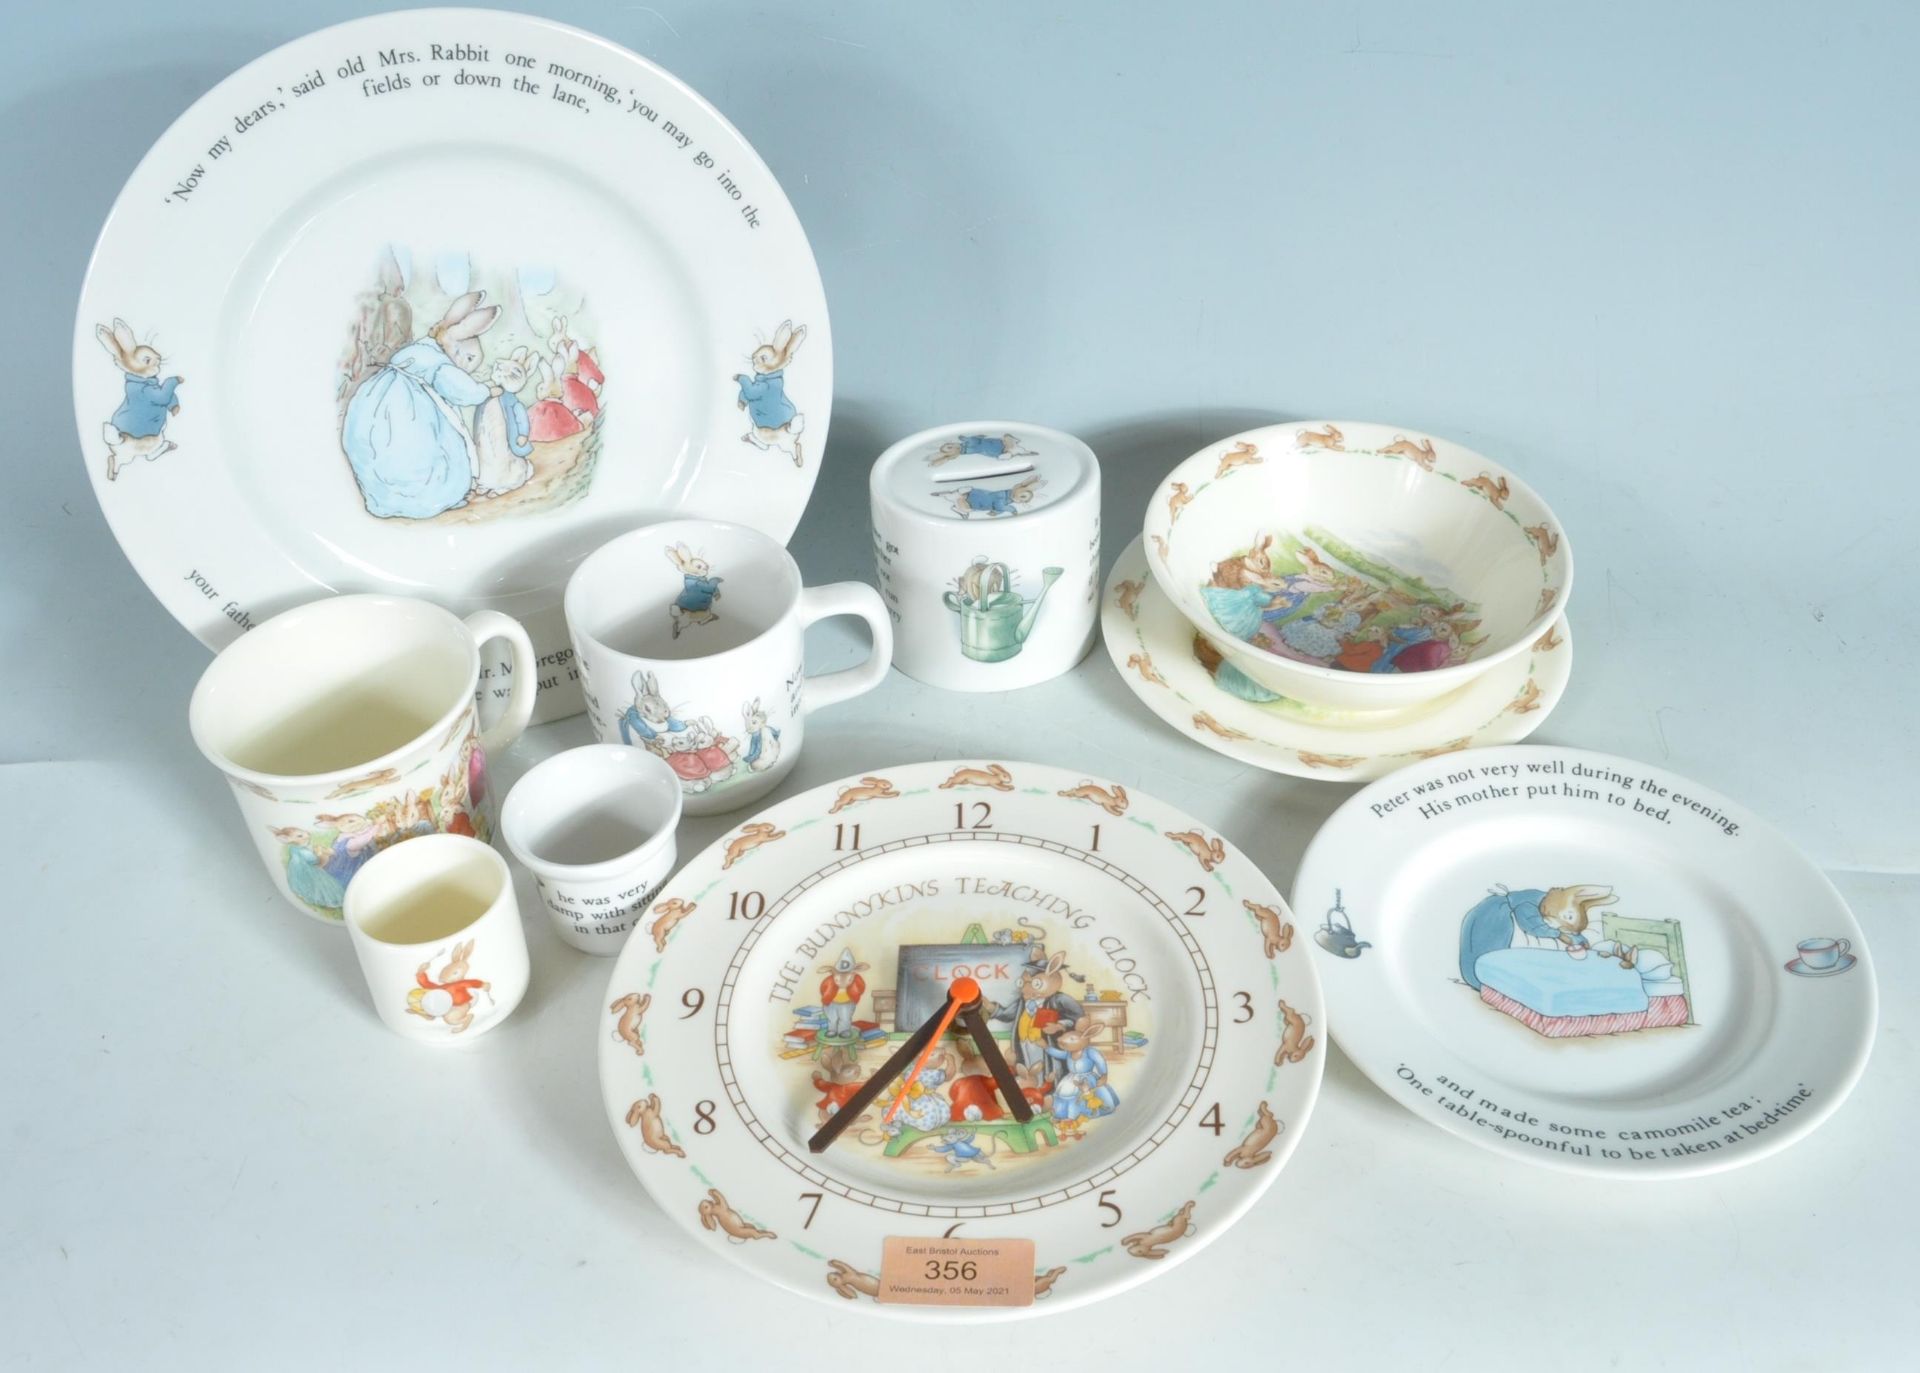 COLLECTION OF PETER RABBIT AND BUNNYKINS CERAMIC WARES